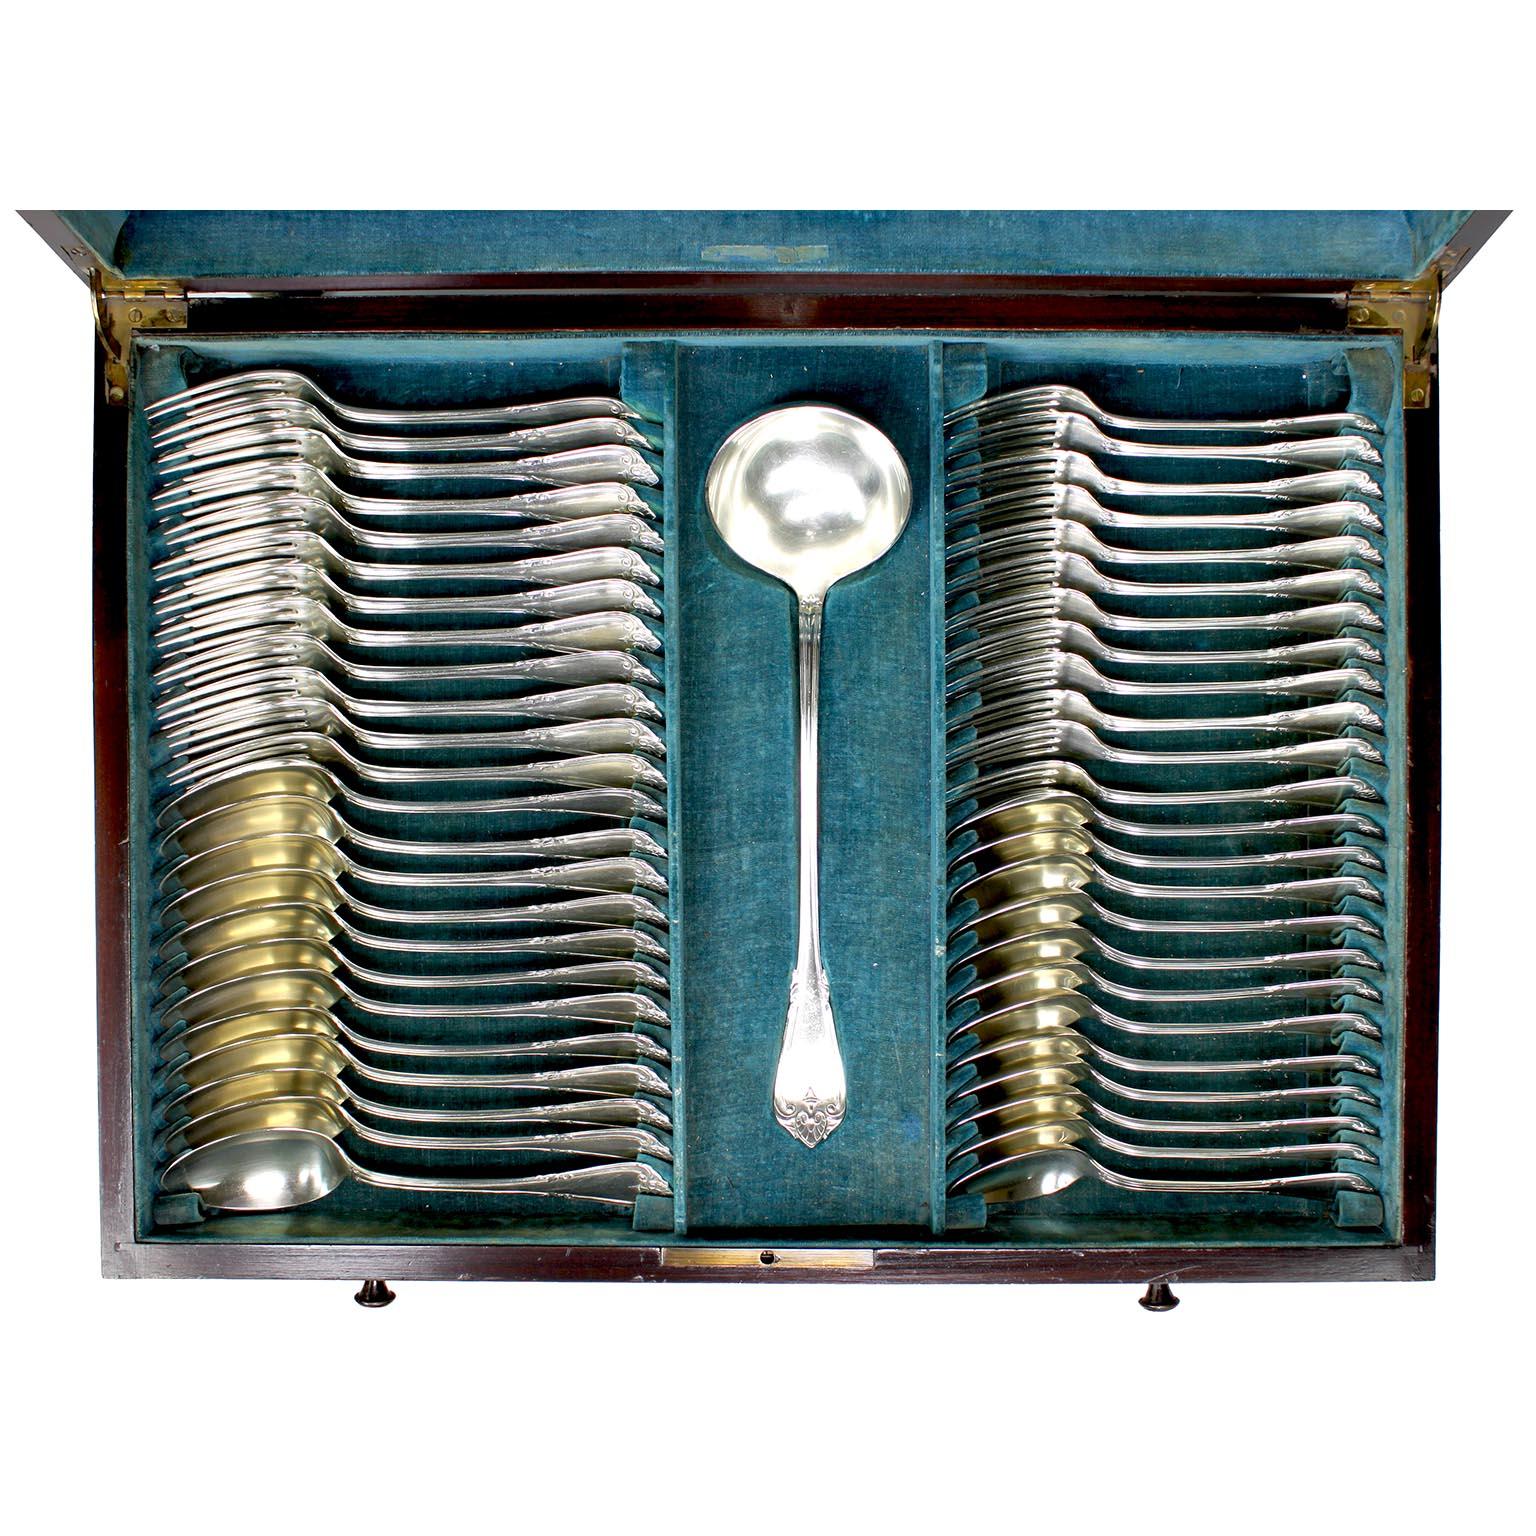 A Fine Early 20th Century 152 Piece Austrian Flatware Set by Berndorf Alpacca For Sale 8